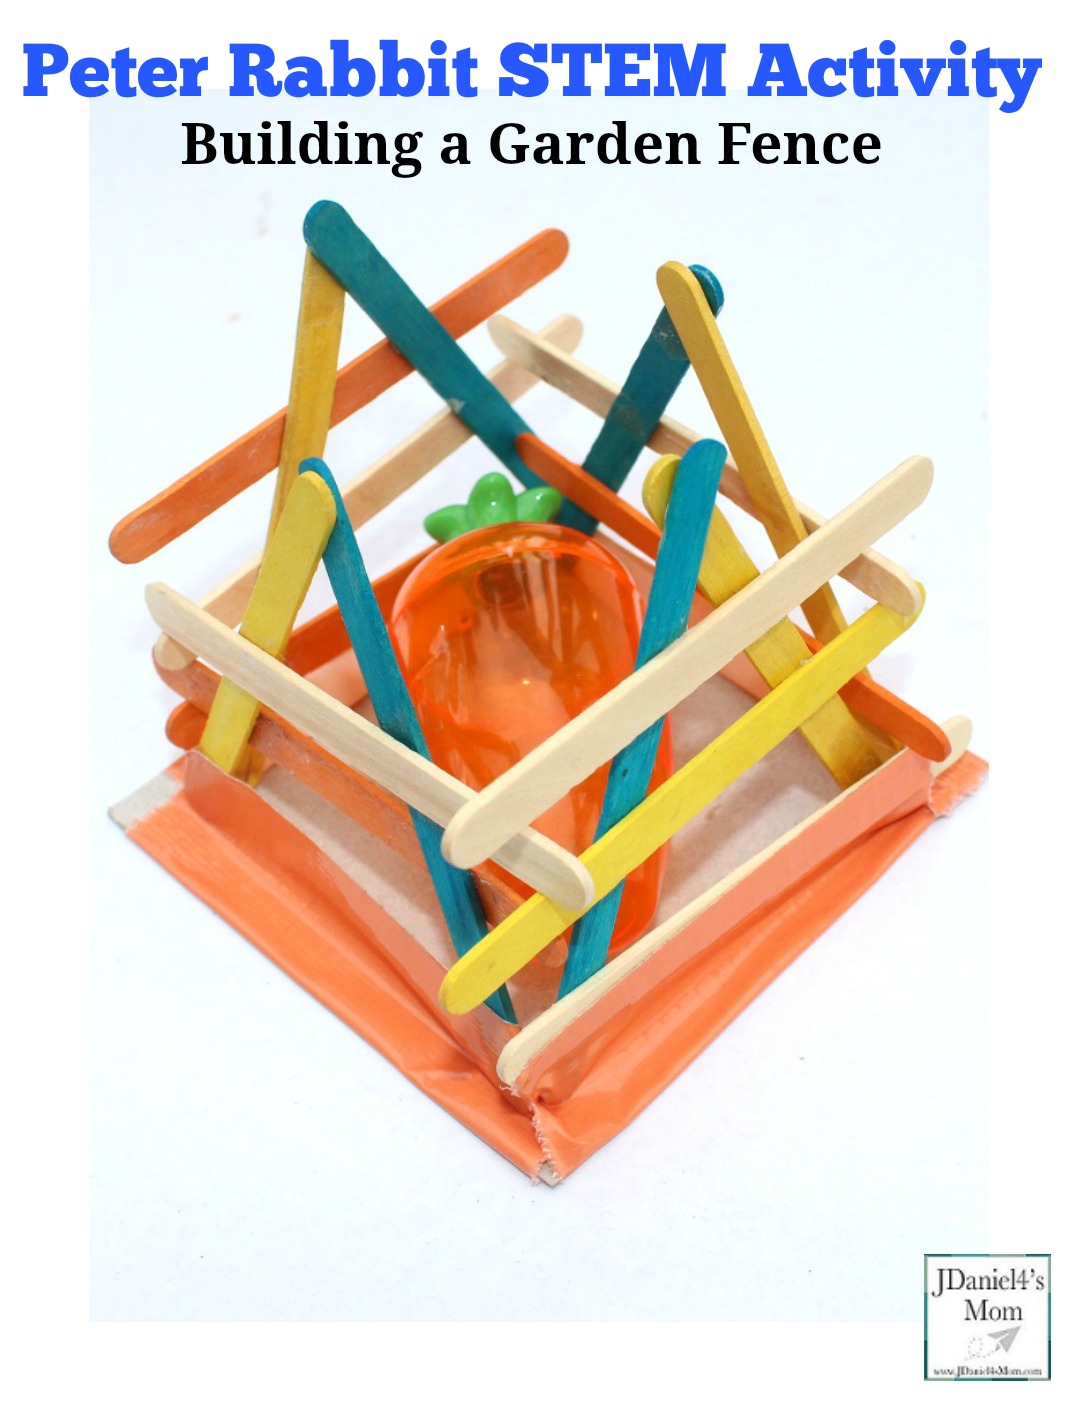 Peter Rabbit STEM Challenge Create a Garden Fence for the Carrot- Children at home and students at school will have fun designing and then building a fence to protect a giant plastic carrot. This activity explores each of the areas of STEM engineering.